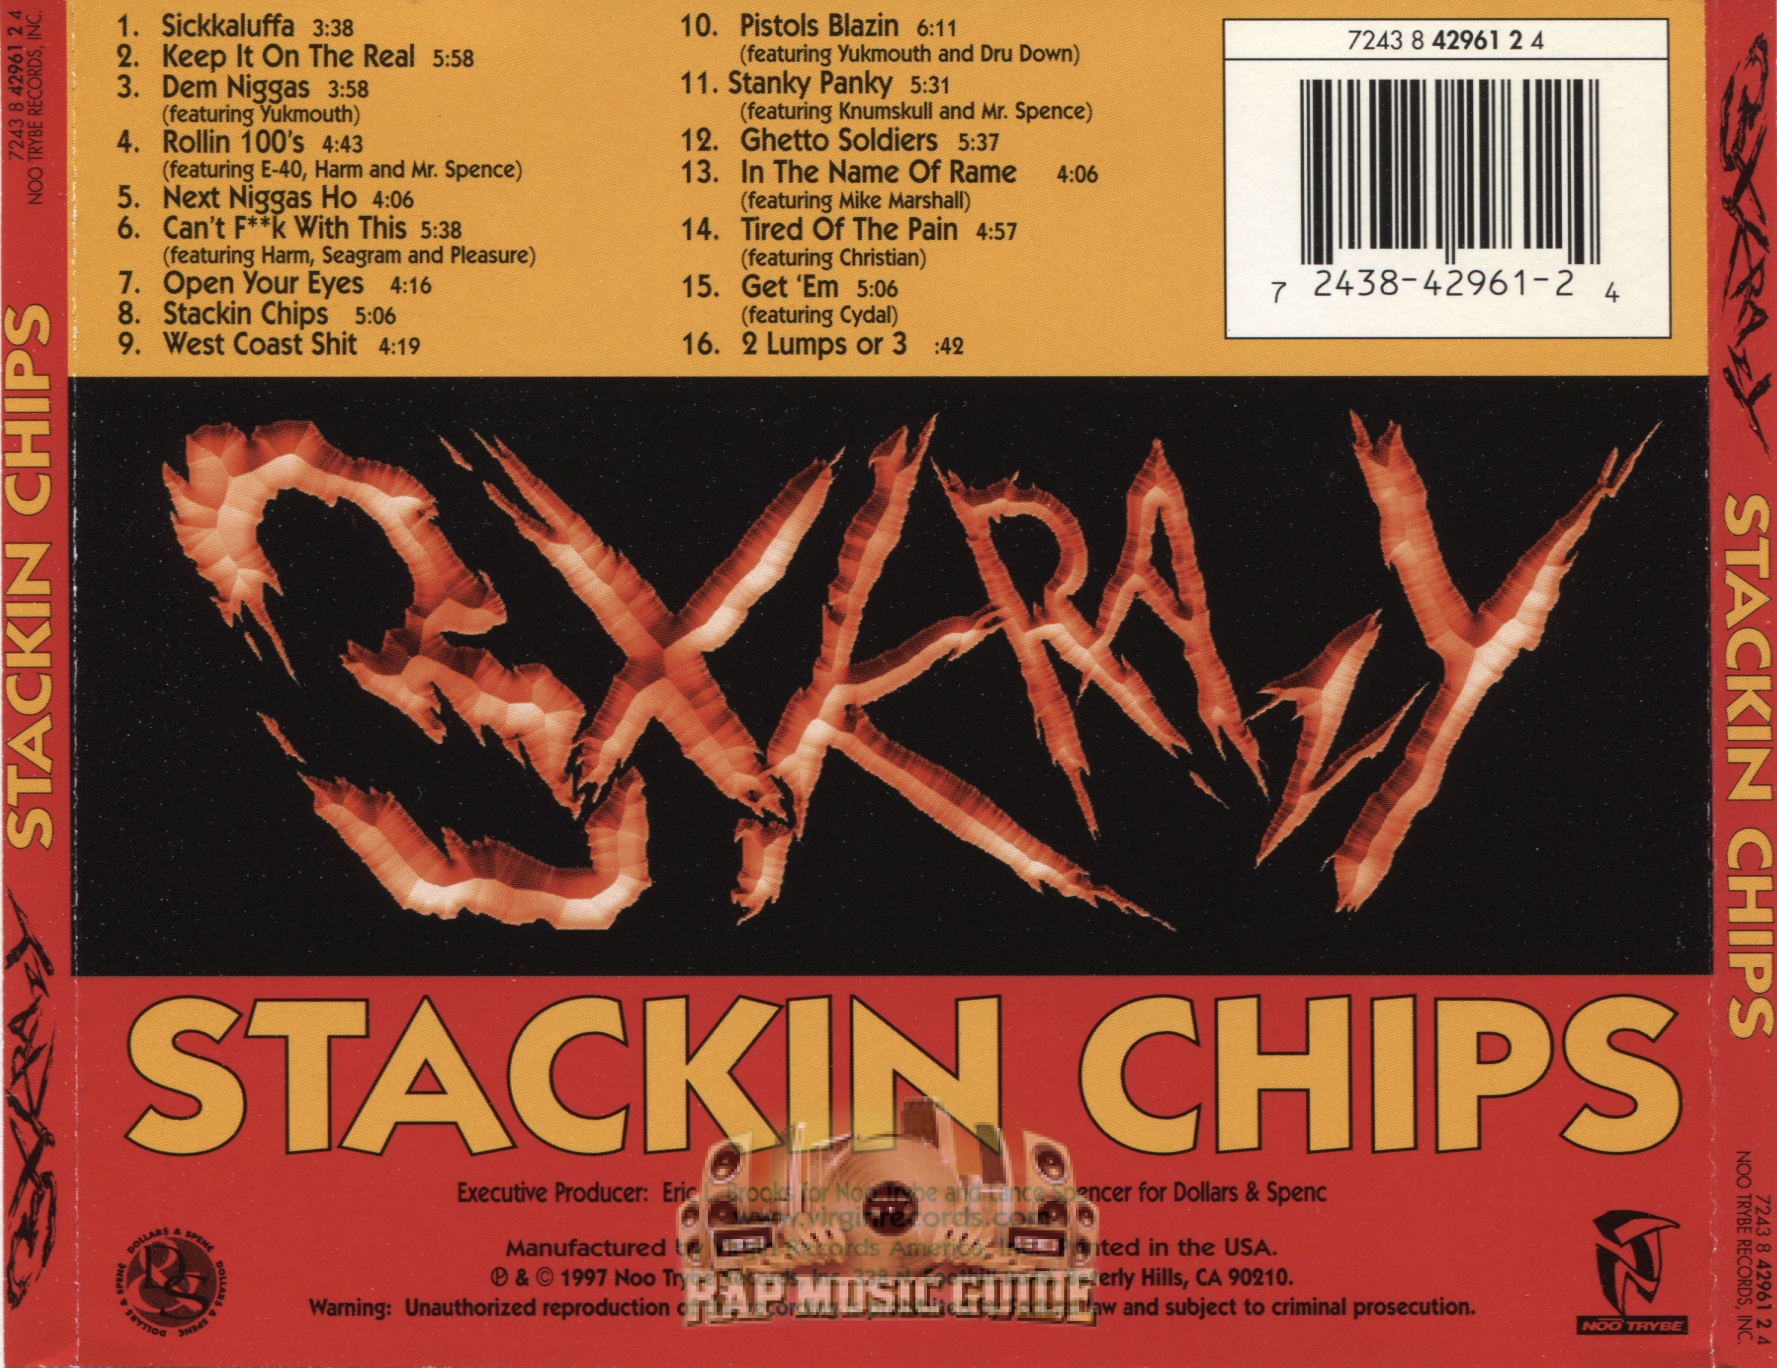 3X Krazy - Stackin Chips: CD | Rap Music Guide